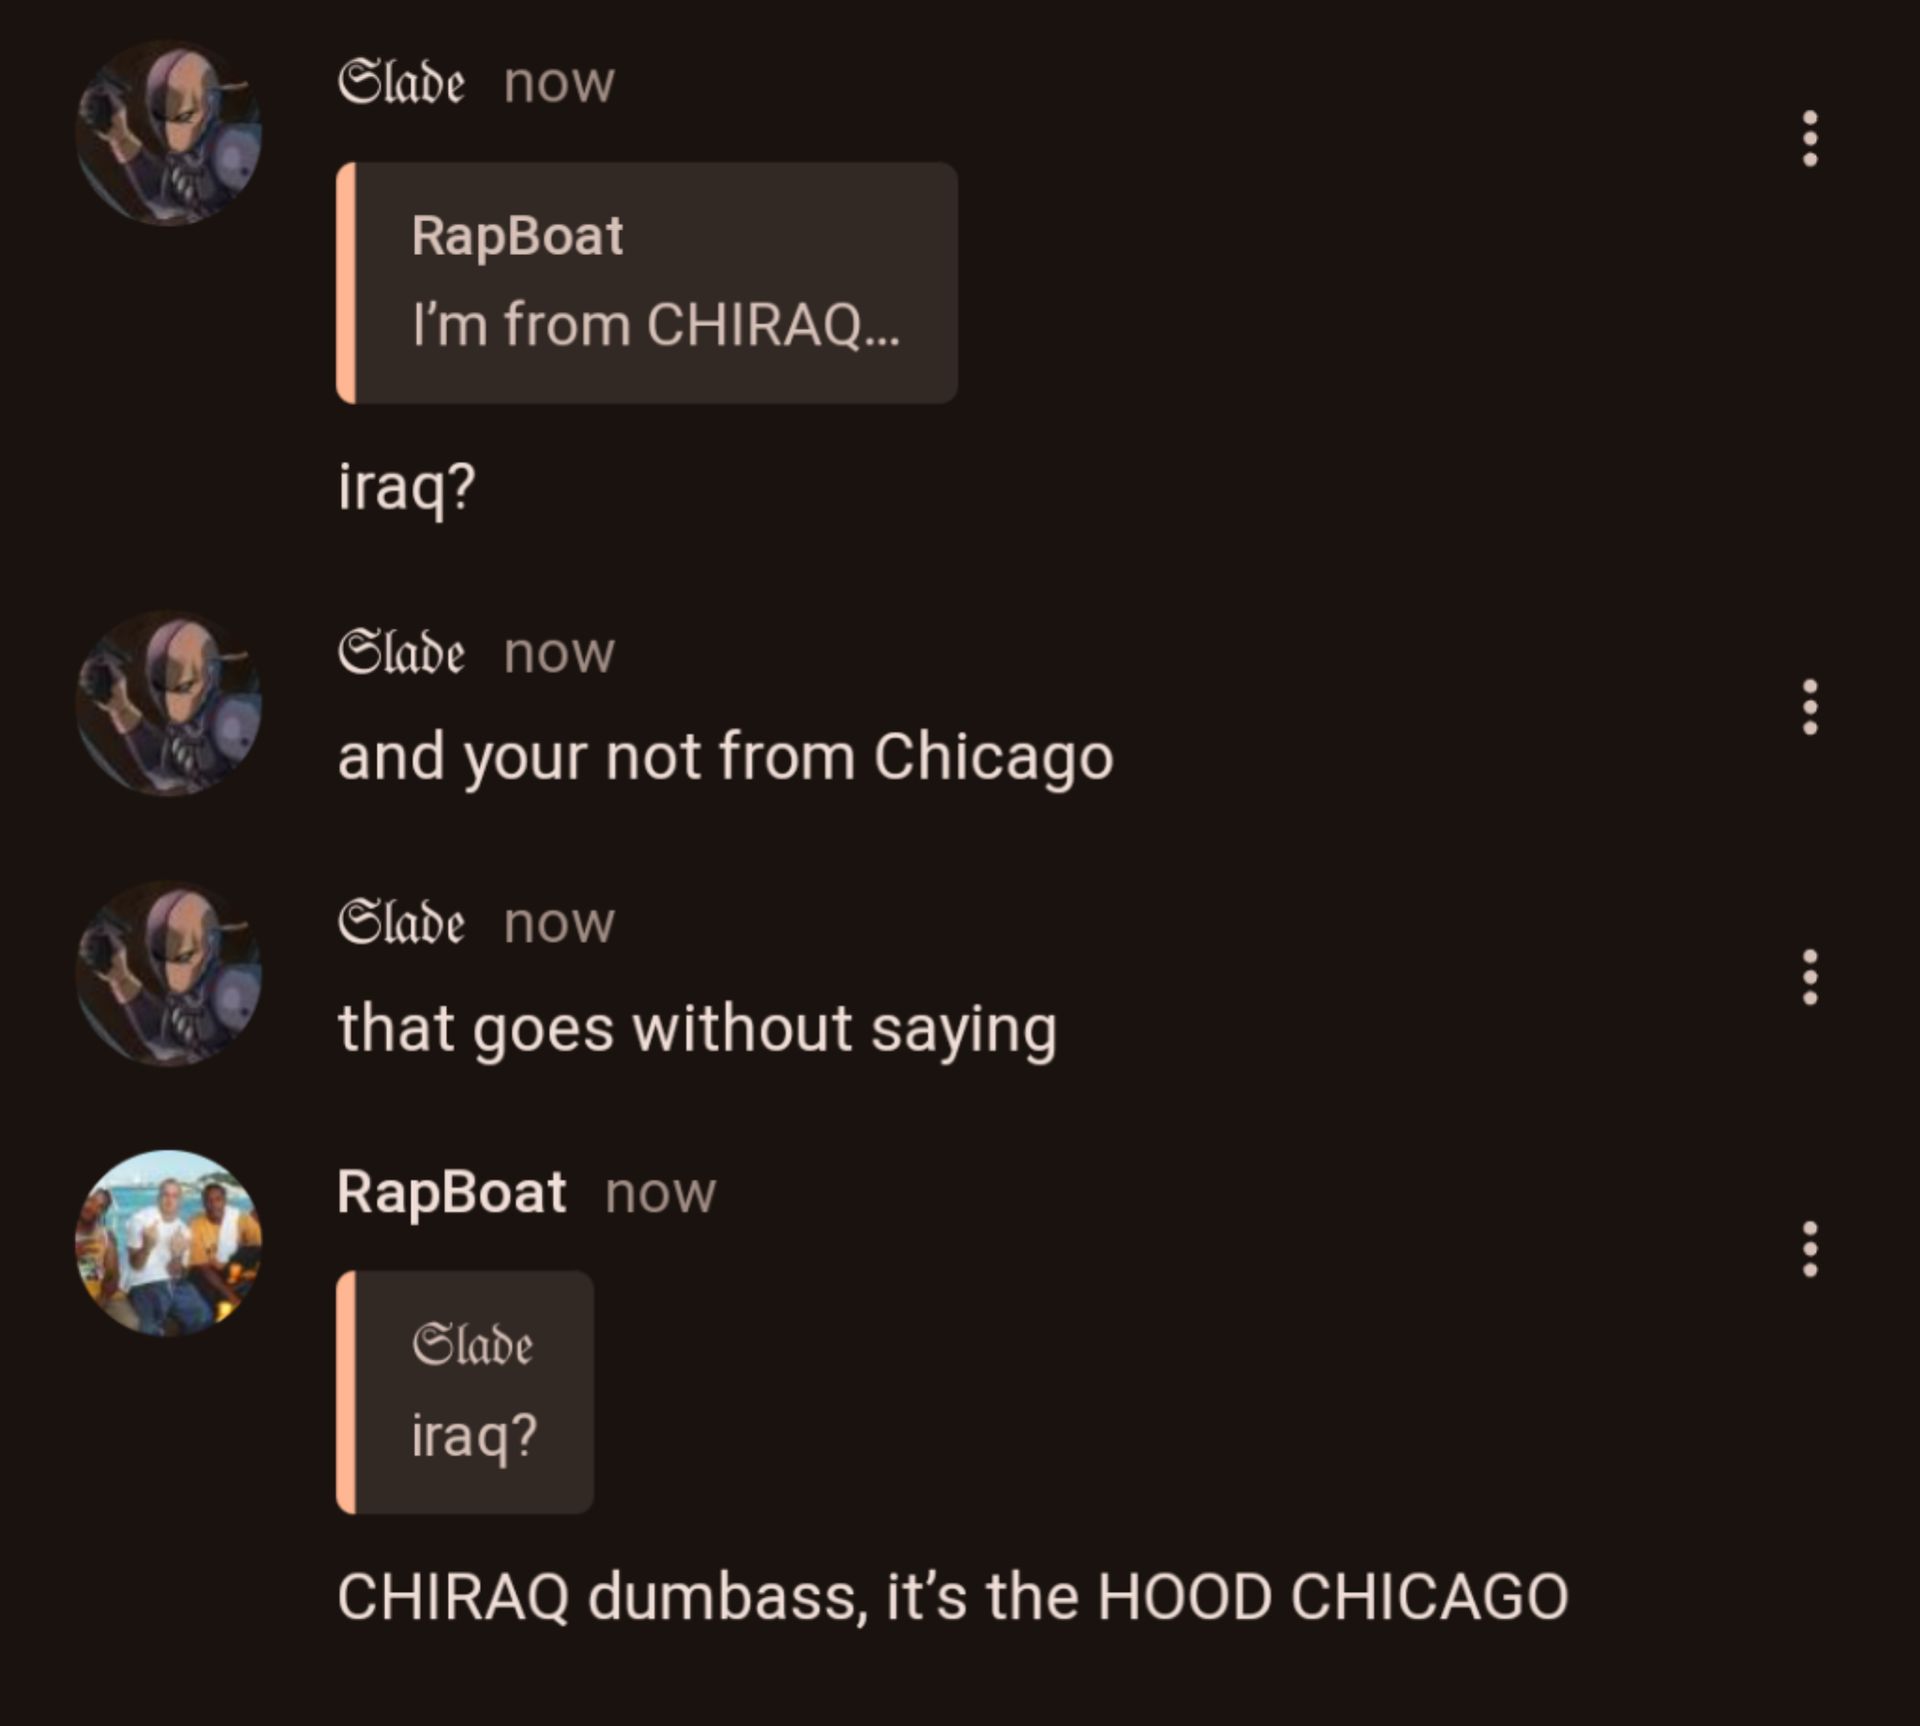 Slade now
RapBoat
I'm from CHIRAQ...
iraq?
Slade now
and your not from Chicago
Slade now
that goes without saying
RapBoat now
Slade
iraq?
CHIRAQ dumbass, it's the HOOD CHICAGO
B